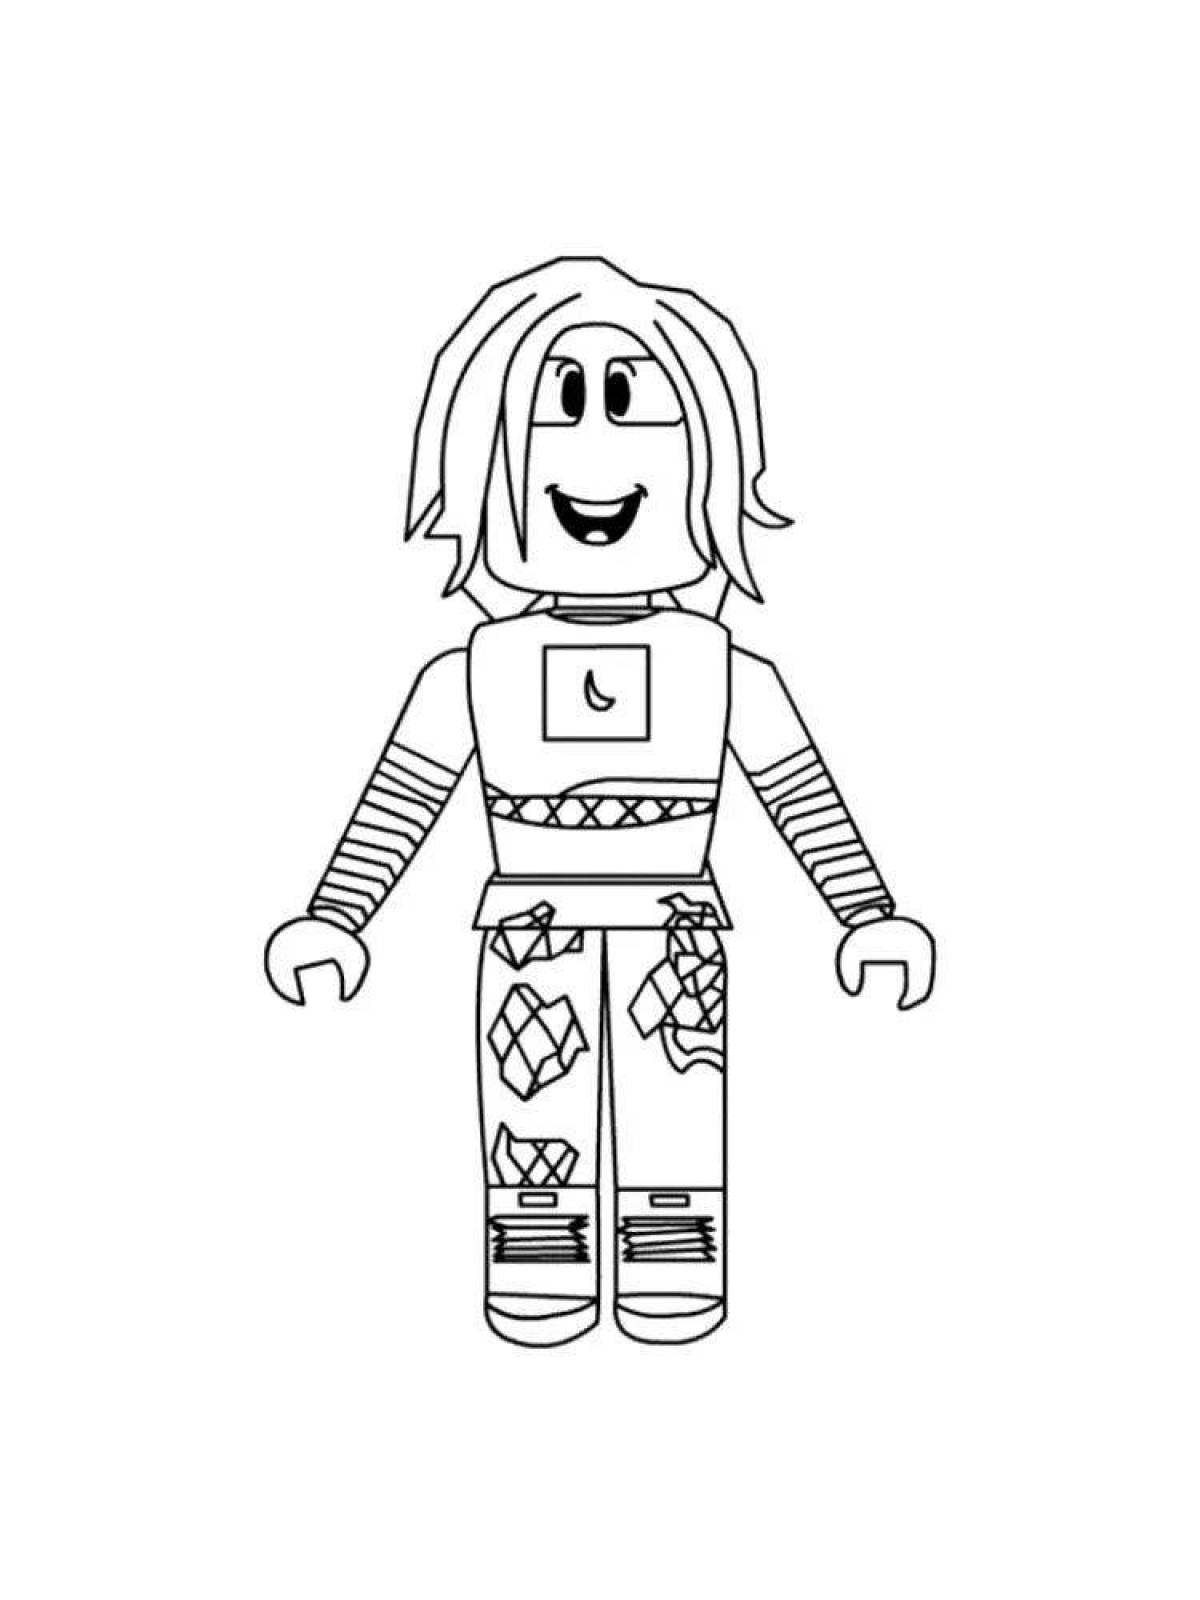 Colorful roblox art coloring page